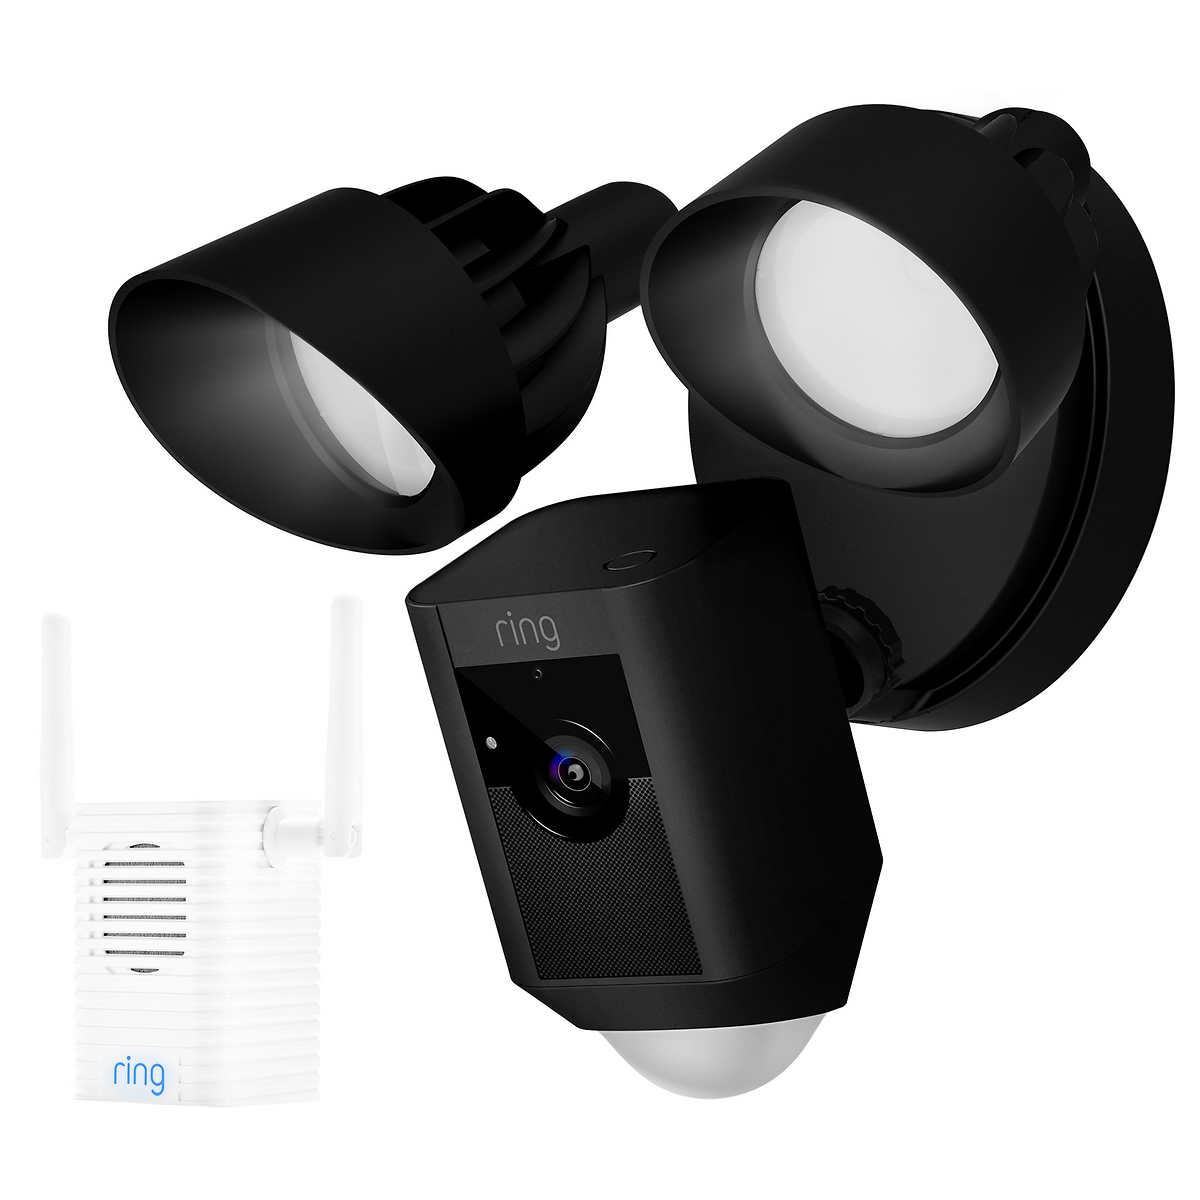 Ring Floodlight Camera with Chime Pro - $139.99